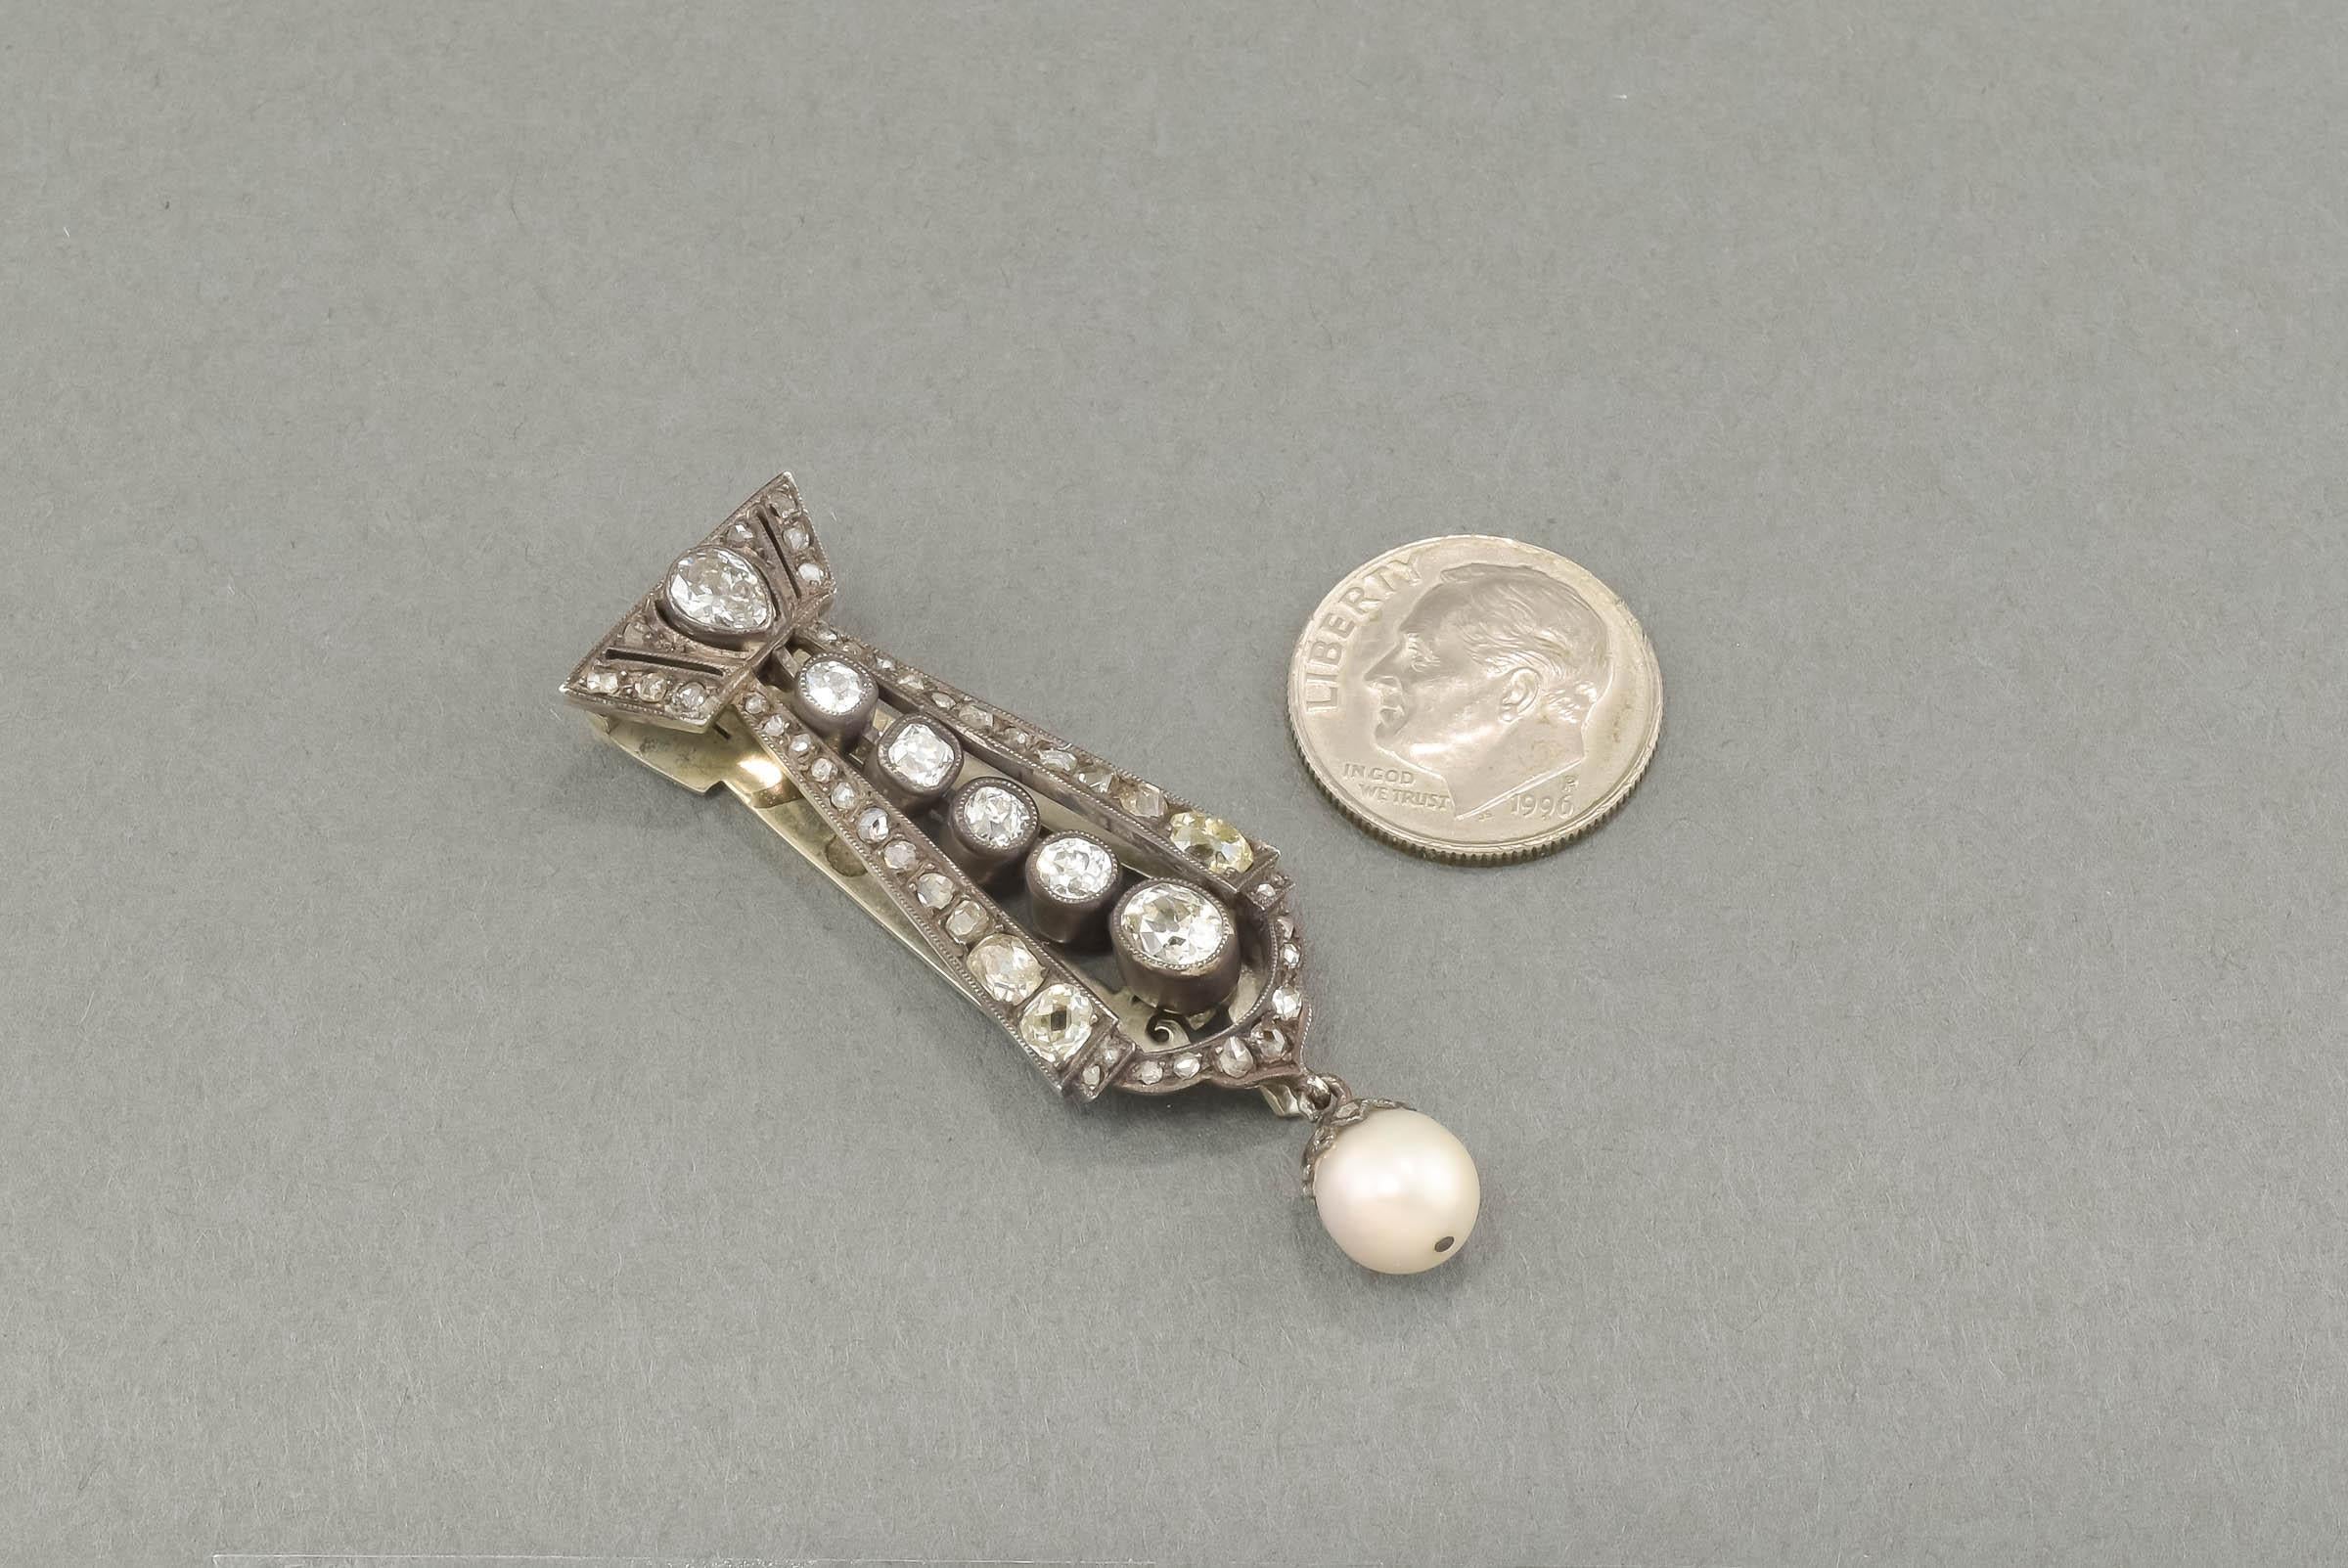 An absolutely stunning Victorian period Diamond & Pearl Pendant - Dress Clip with super fiery old mine cut & rose cut diamonds along with a sizable lustrous pearl drop.  Just gorgeous & so much more wonderful in person. 

Crafted of silver and gold